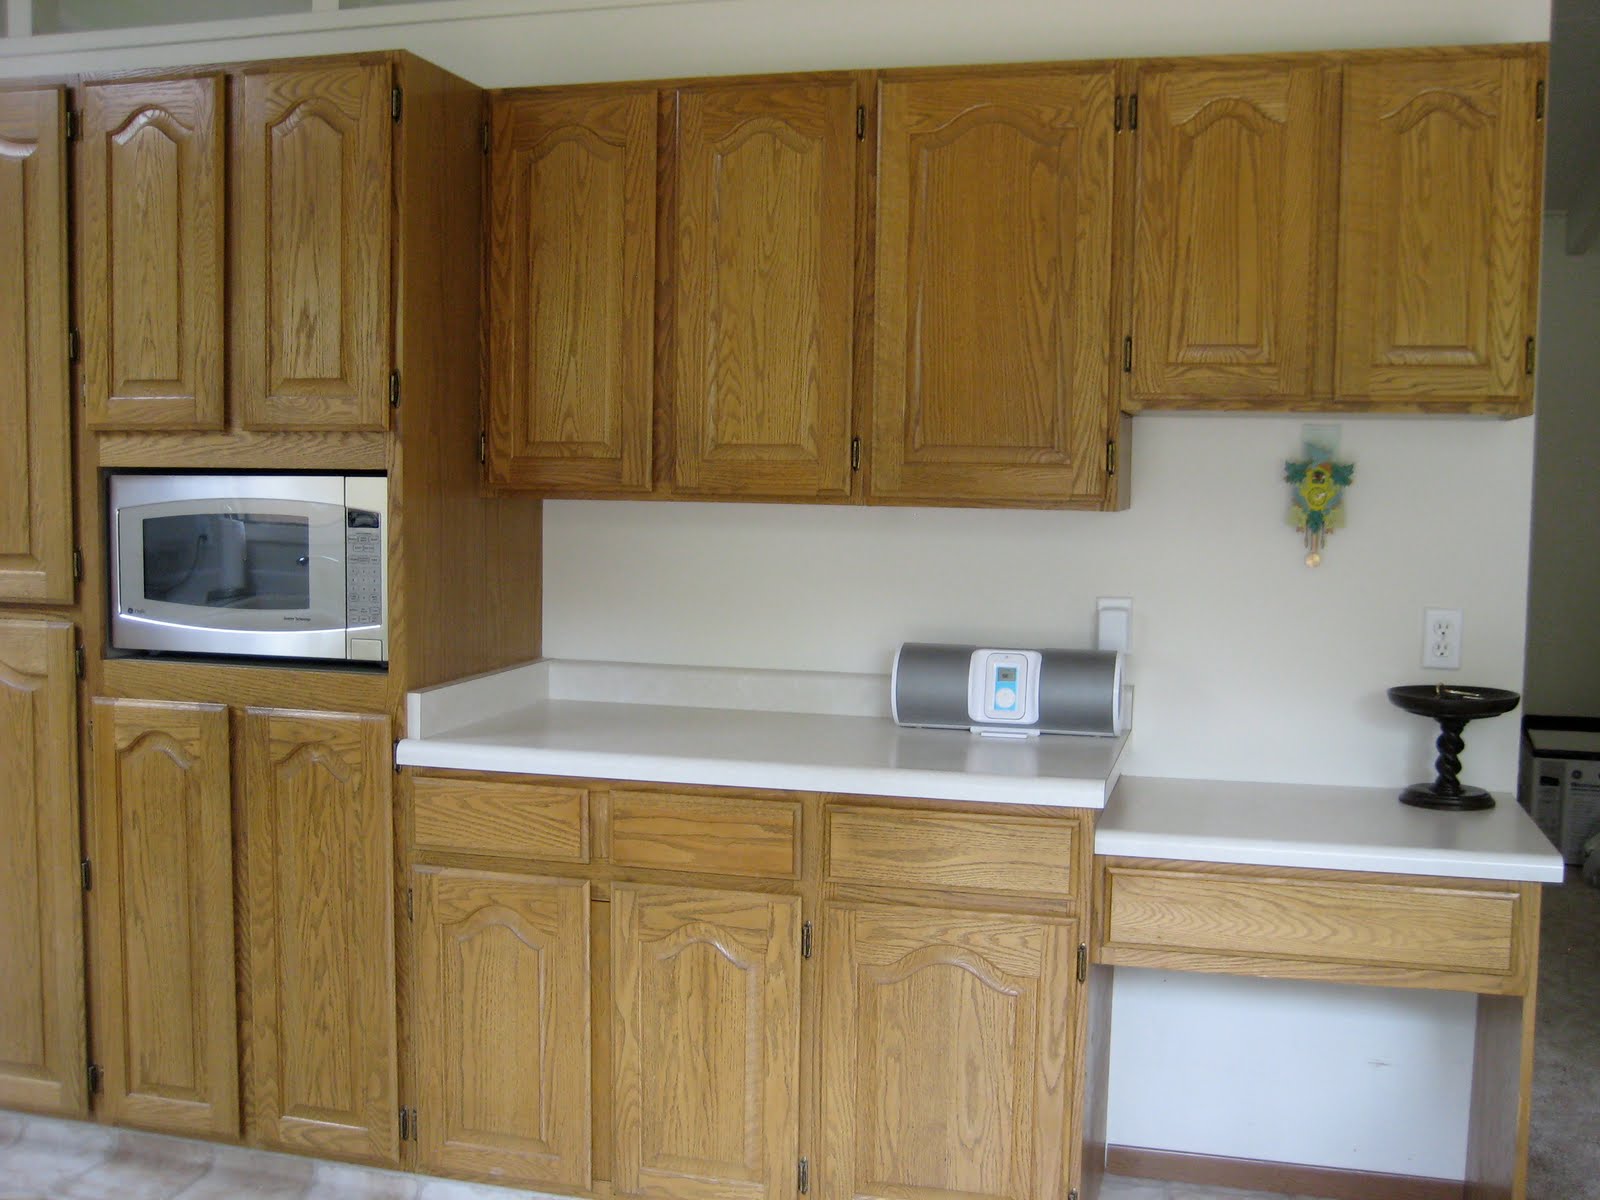 Painted Oak Kitchen Cabinets Before And After We Painted The Cupboards